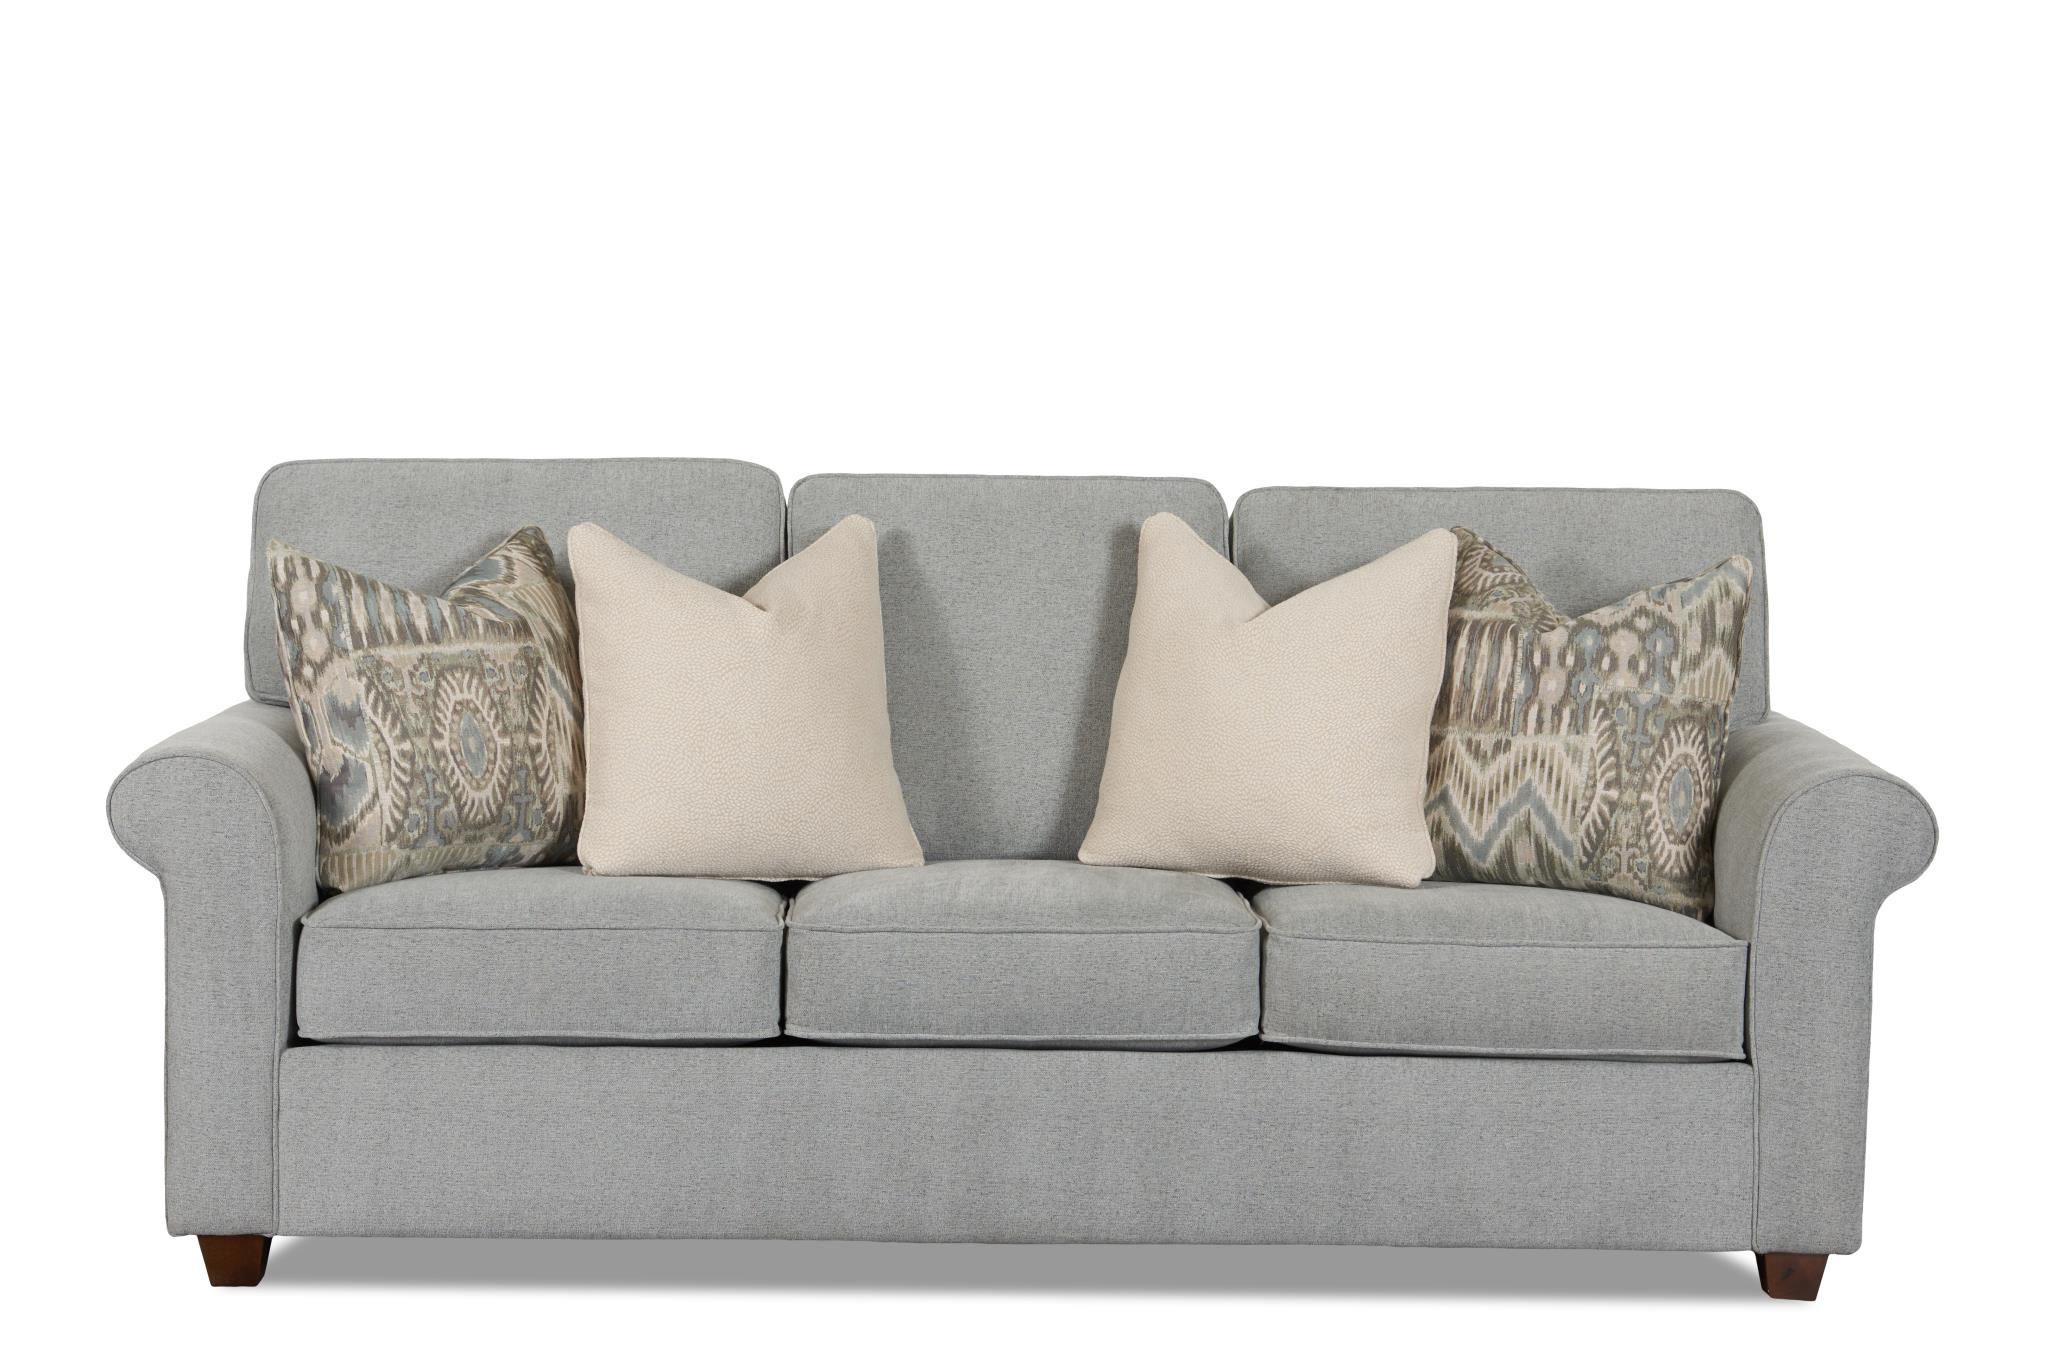 Tenby Sofa in Theron Haze by Wood House Upholstery